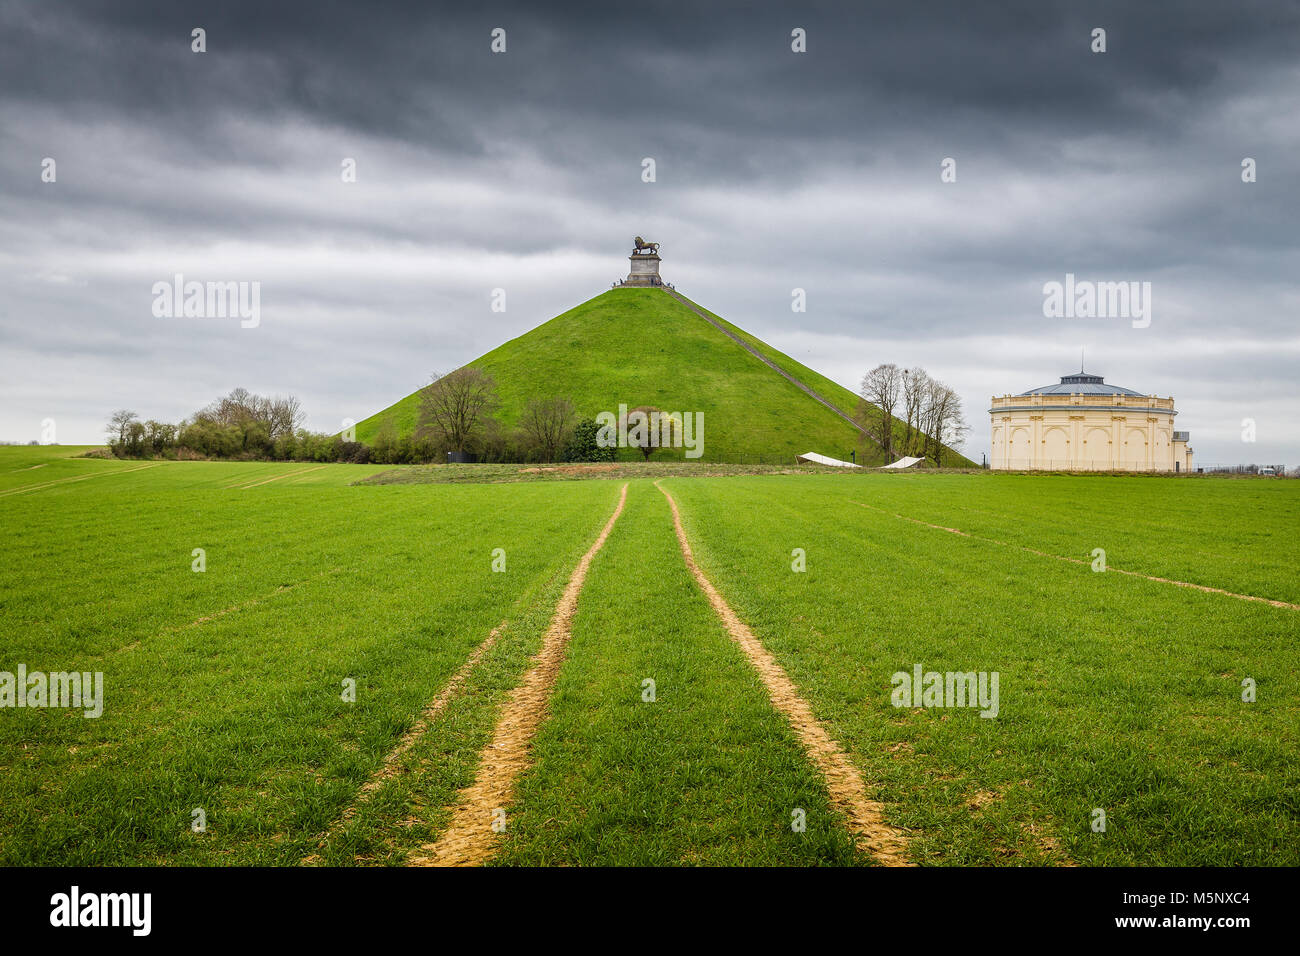 Famous Lion's Mound (Butte du Lion) memorial site, a conical artificial hill located in Braine-l'Alleud comemmorating the battle of Waterloo, Belgium Stock Photo